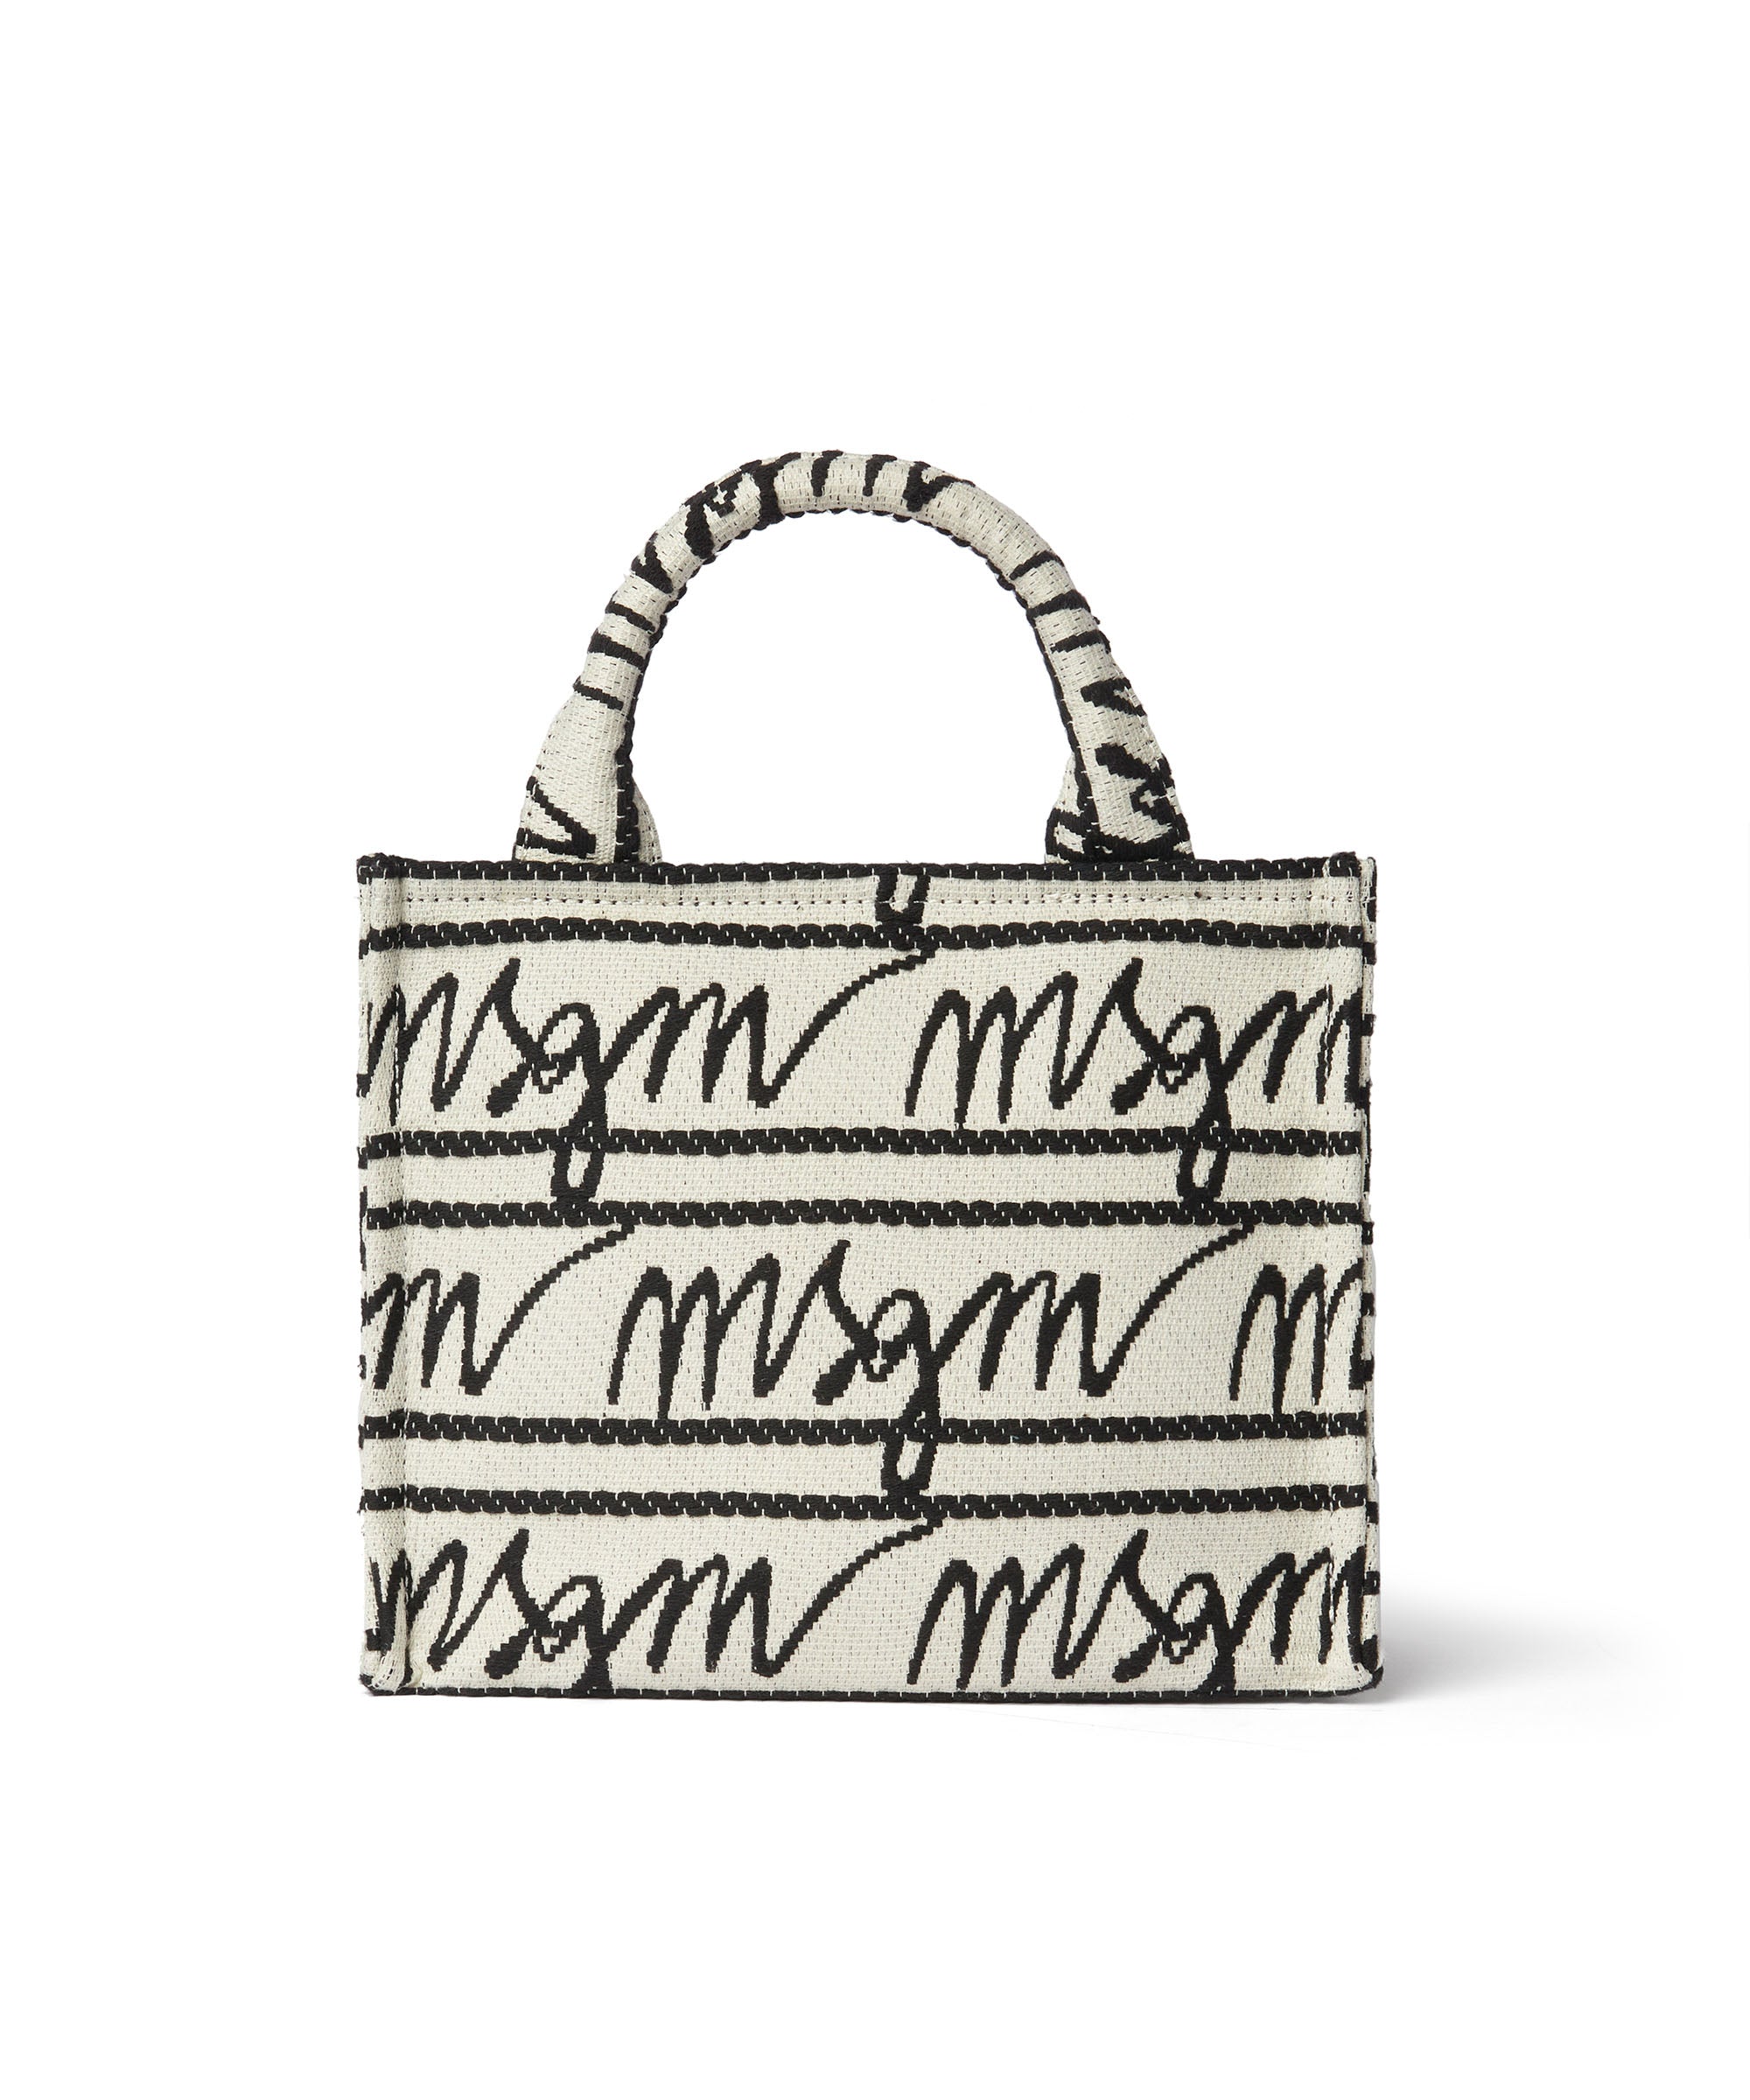 Small anvas tote bag with jacquard logo - MSGM Official